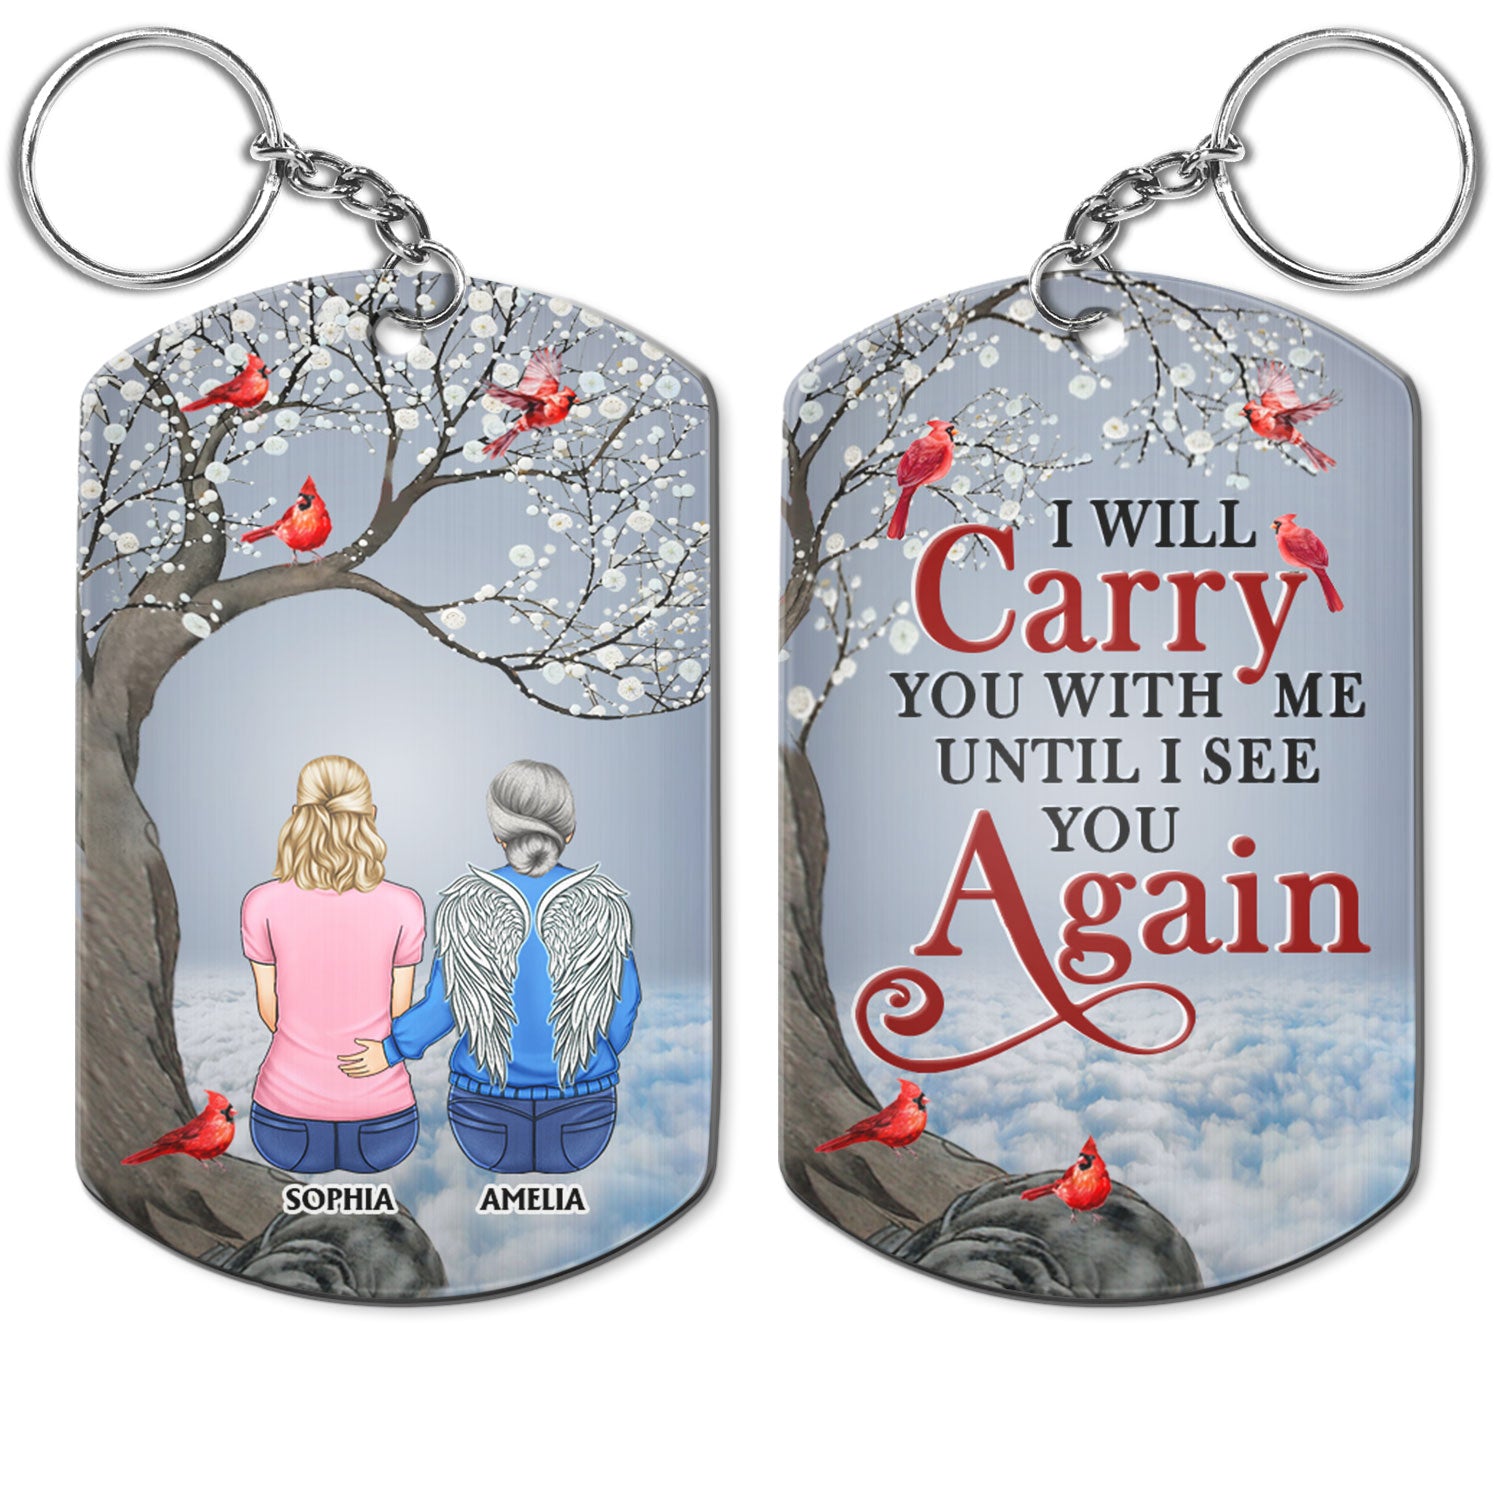 I'll Carry You - Memorial Gift For Family, Siblings, Friends - Personalized Aluminum Keychain